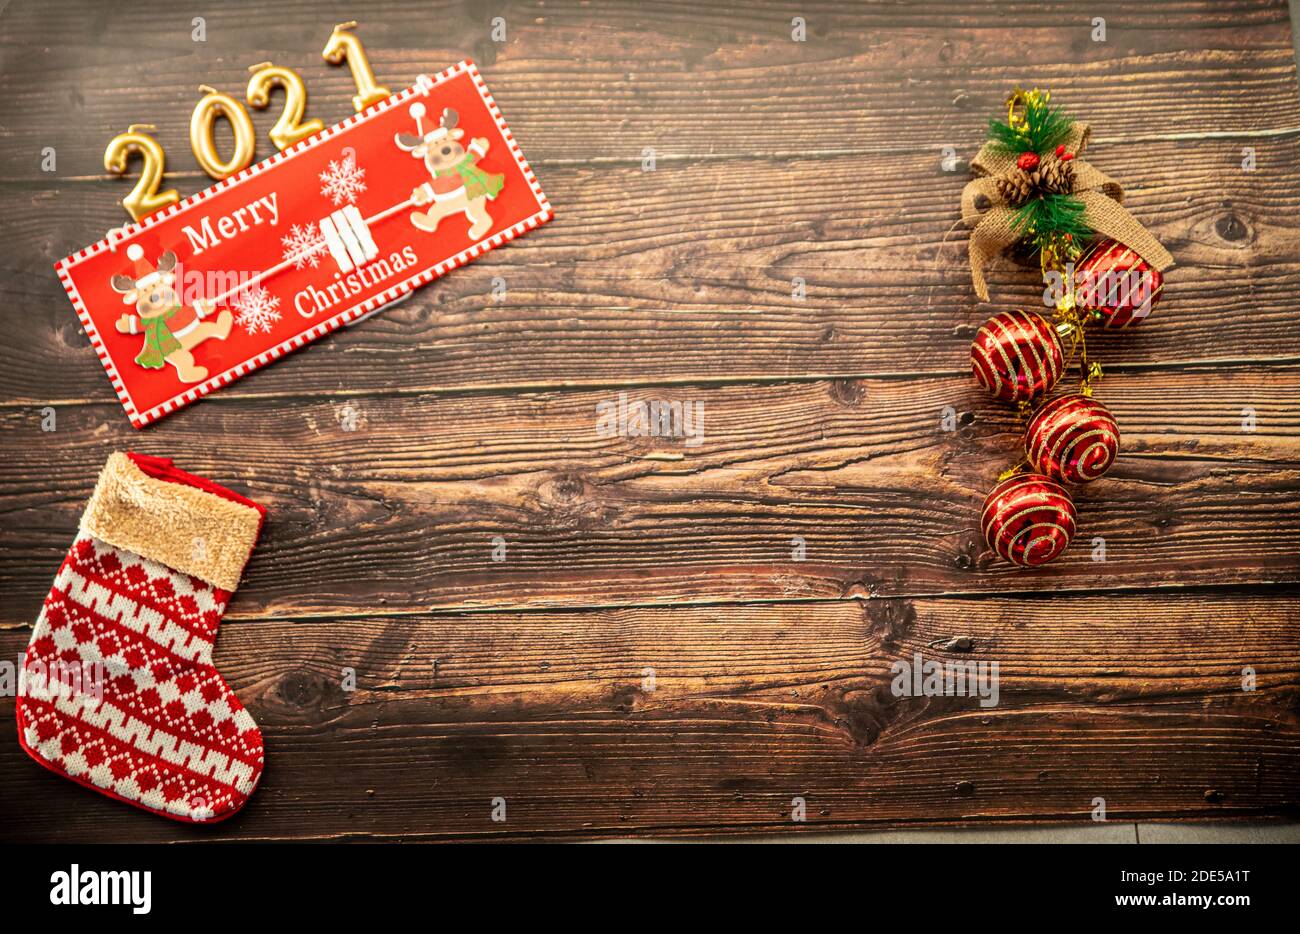 Wooden background with Christmas motifs Stock Photo